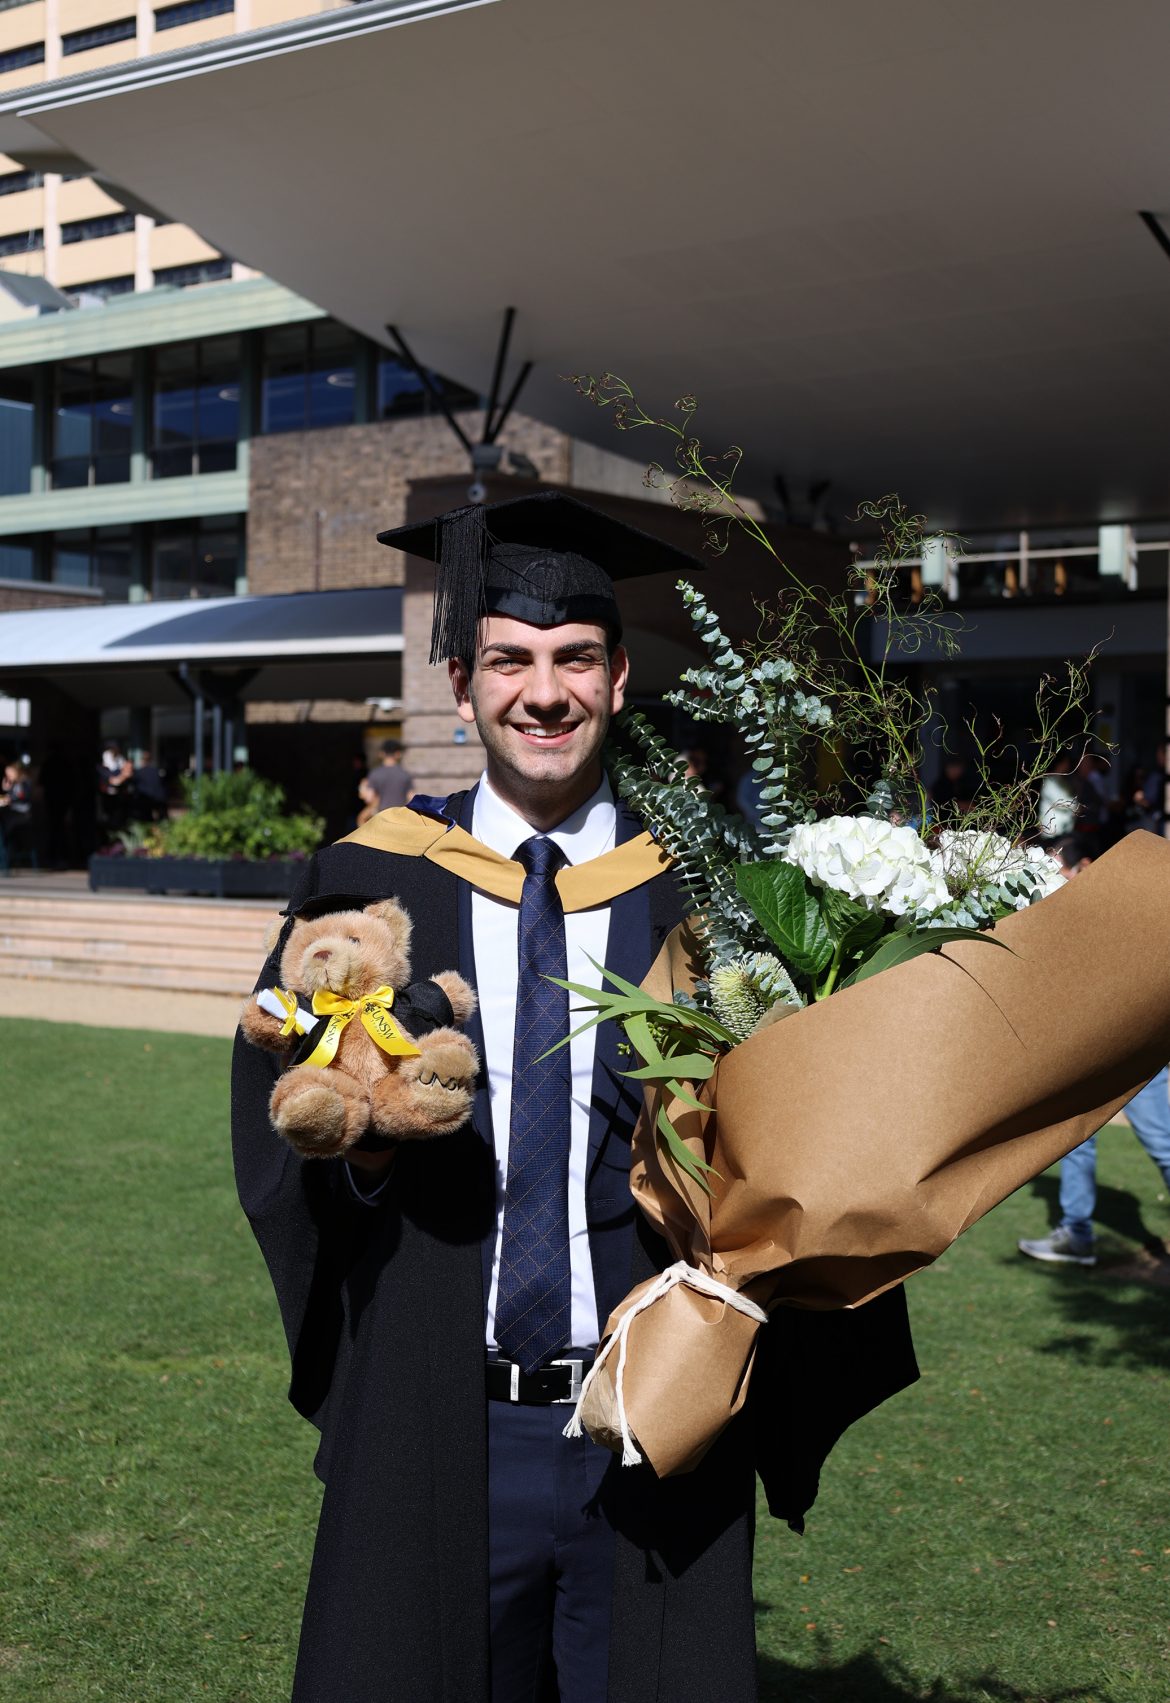 The moment a UNSW graduate busts out kung fu moves to receive his degree |  SBS News